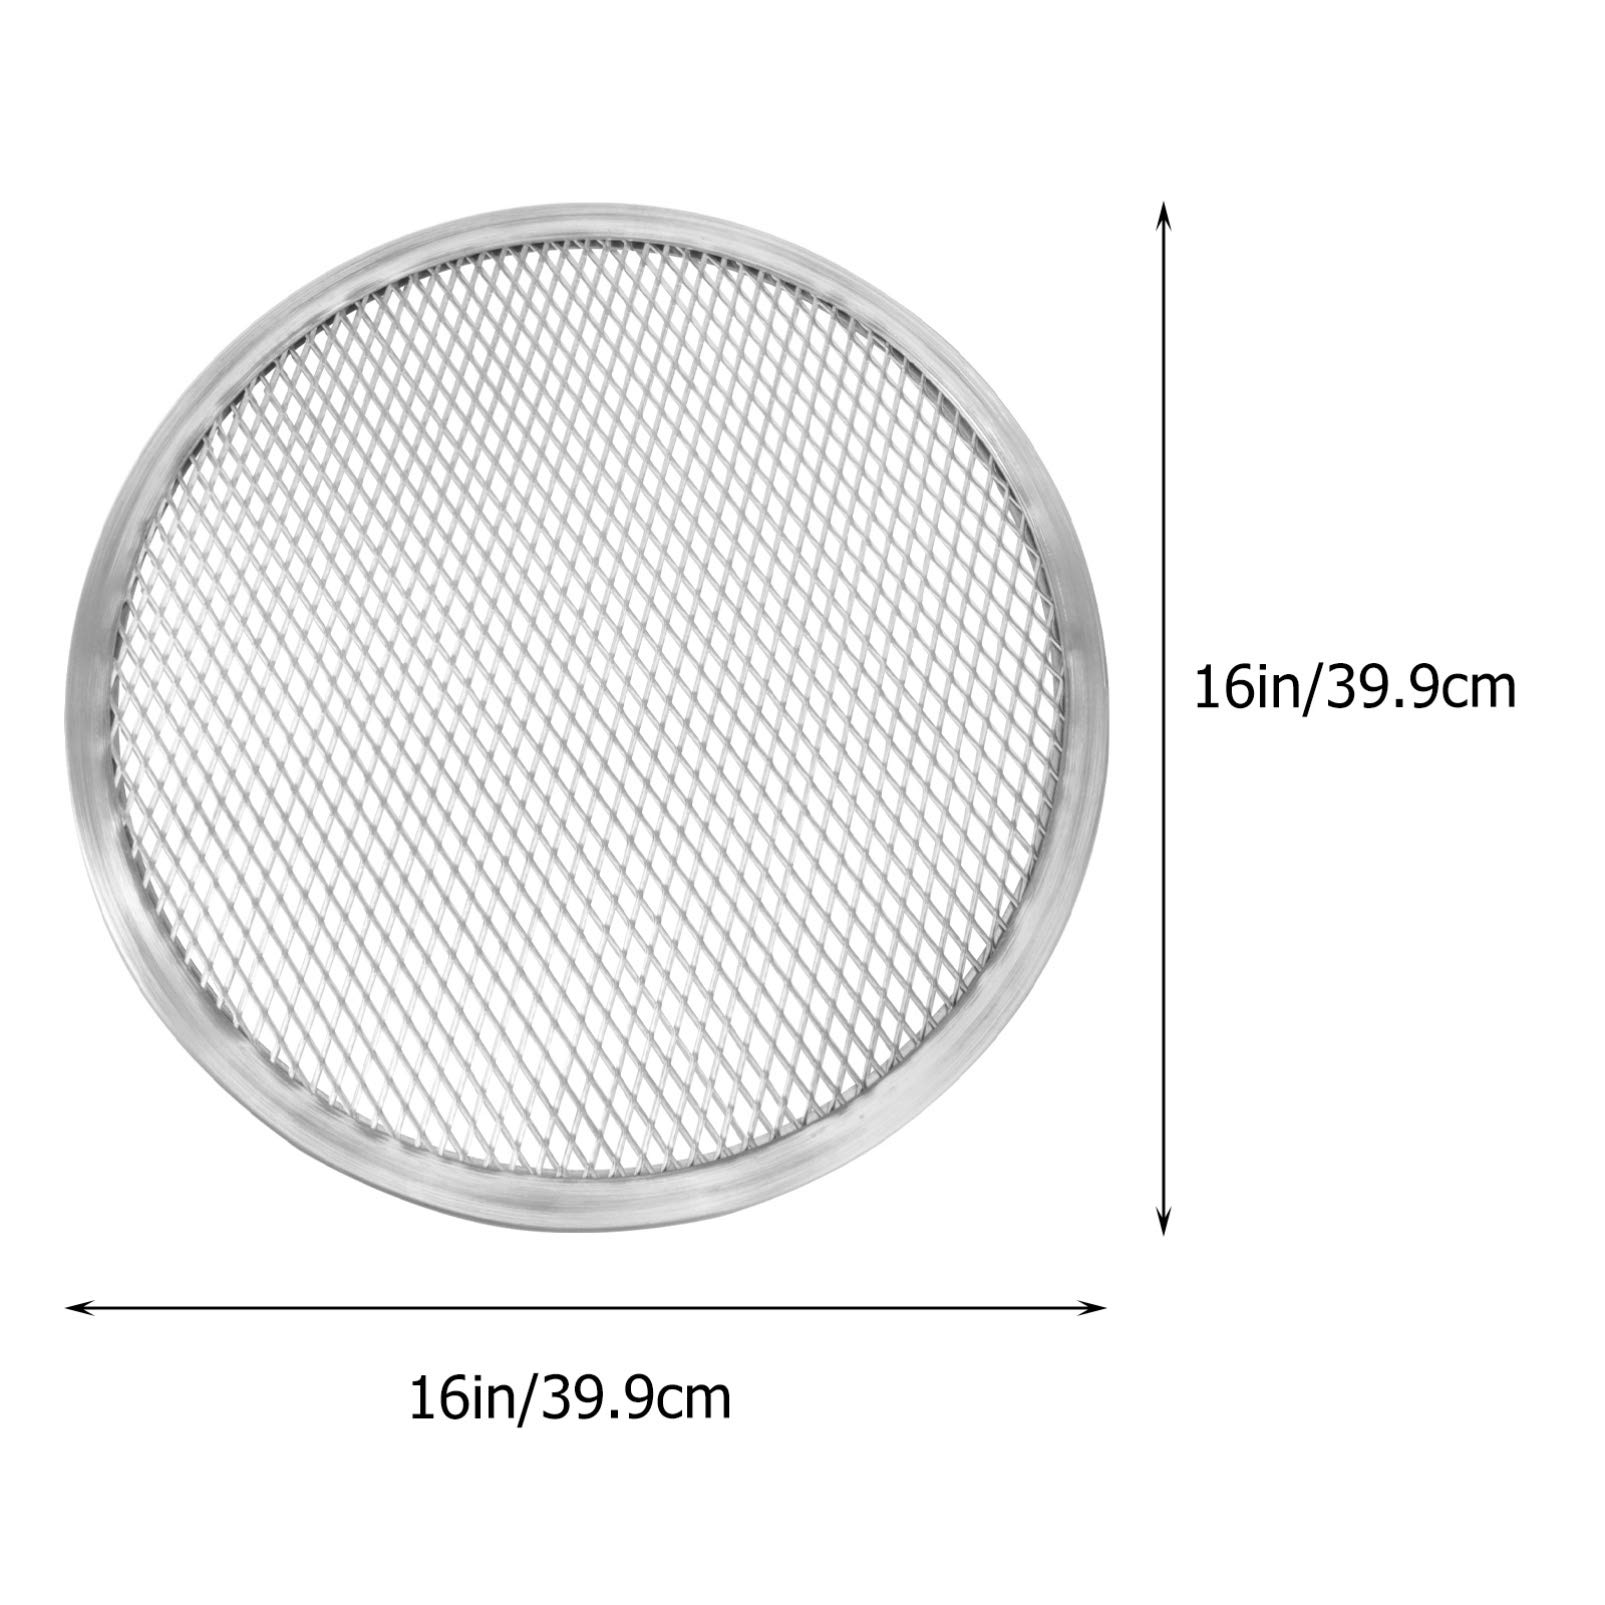 BESTonZON Pizza Pan, 16 Inch Pizza Tray with Holes, Seamless Aluminum Pizza Screen, Non Stick Mesh Net Baking Tray Cookware Kitchen Tool For Oven, BBQ, Kitchen Restaurant